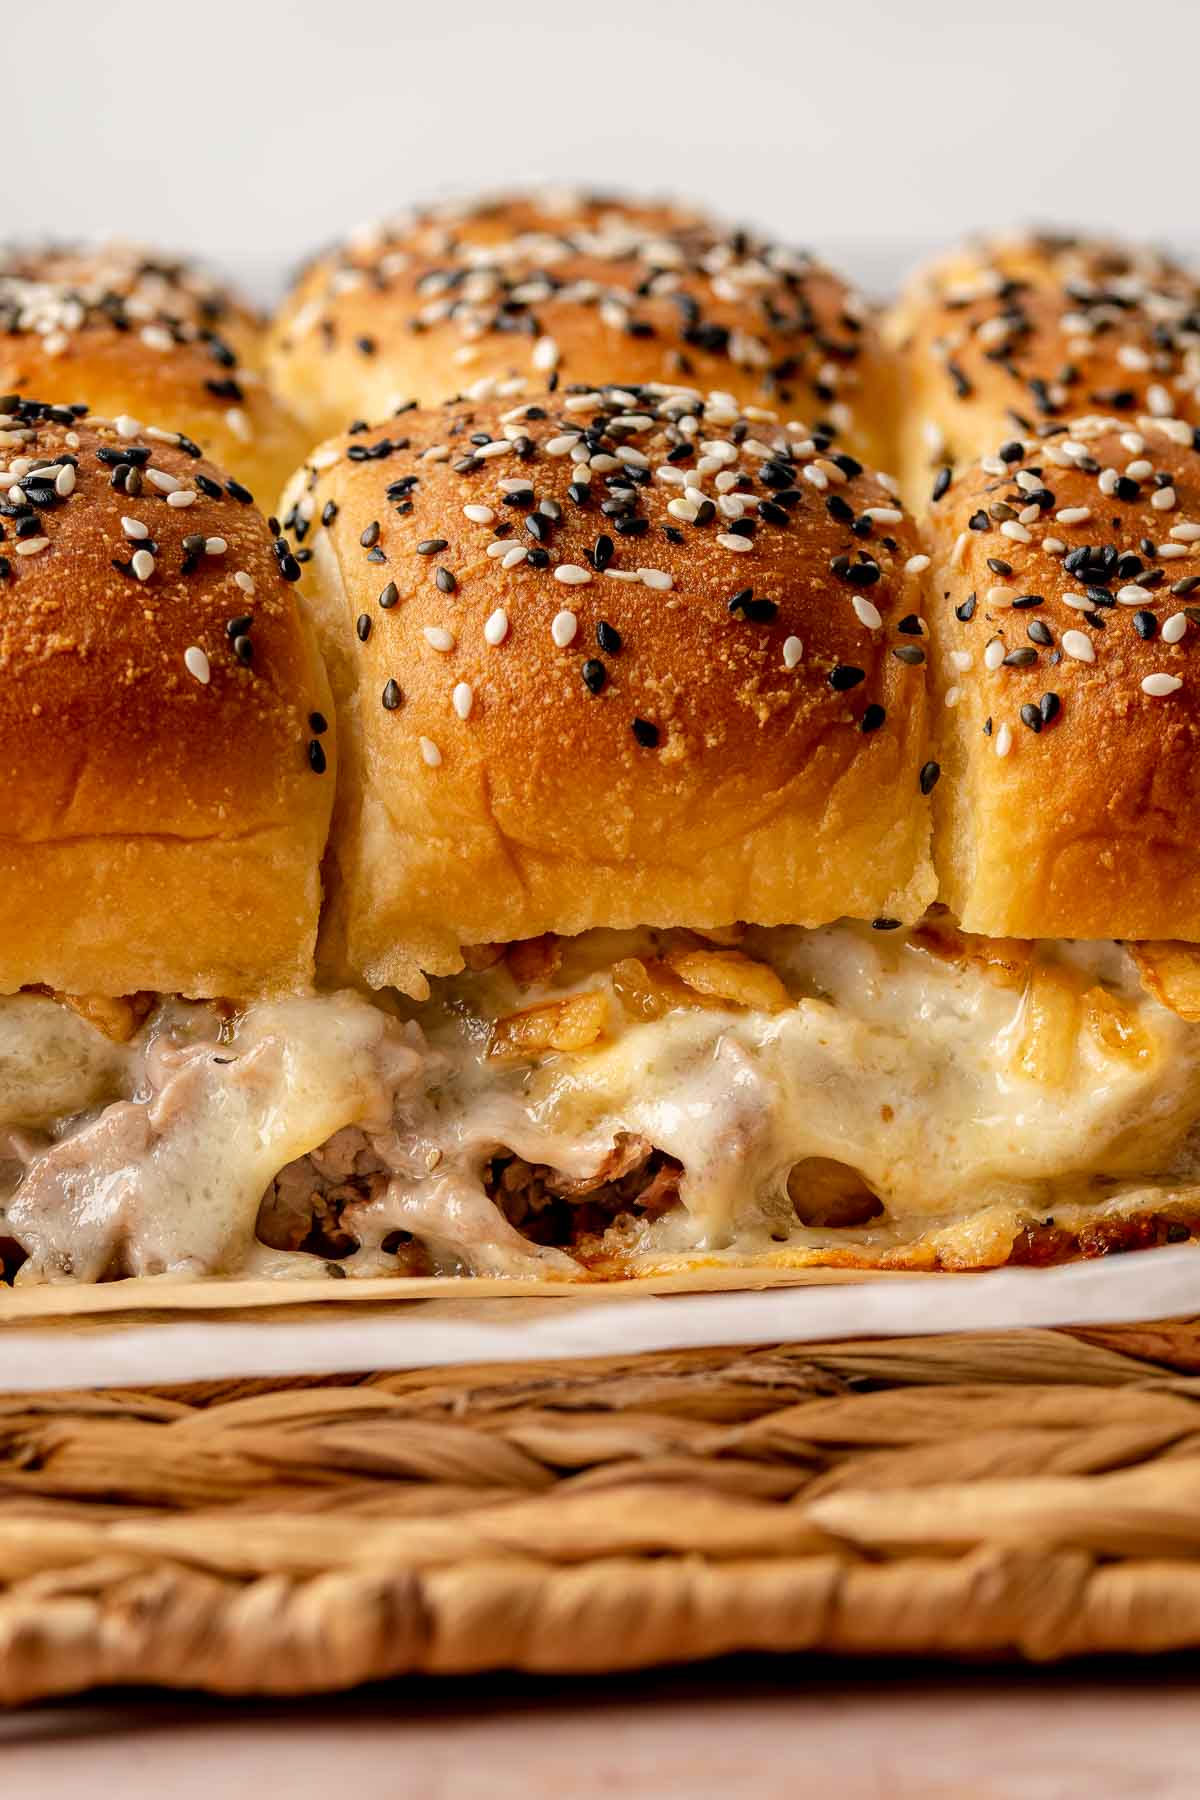 Baked beef sliders with cheese melting out the sides.